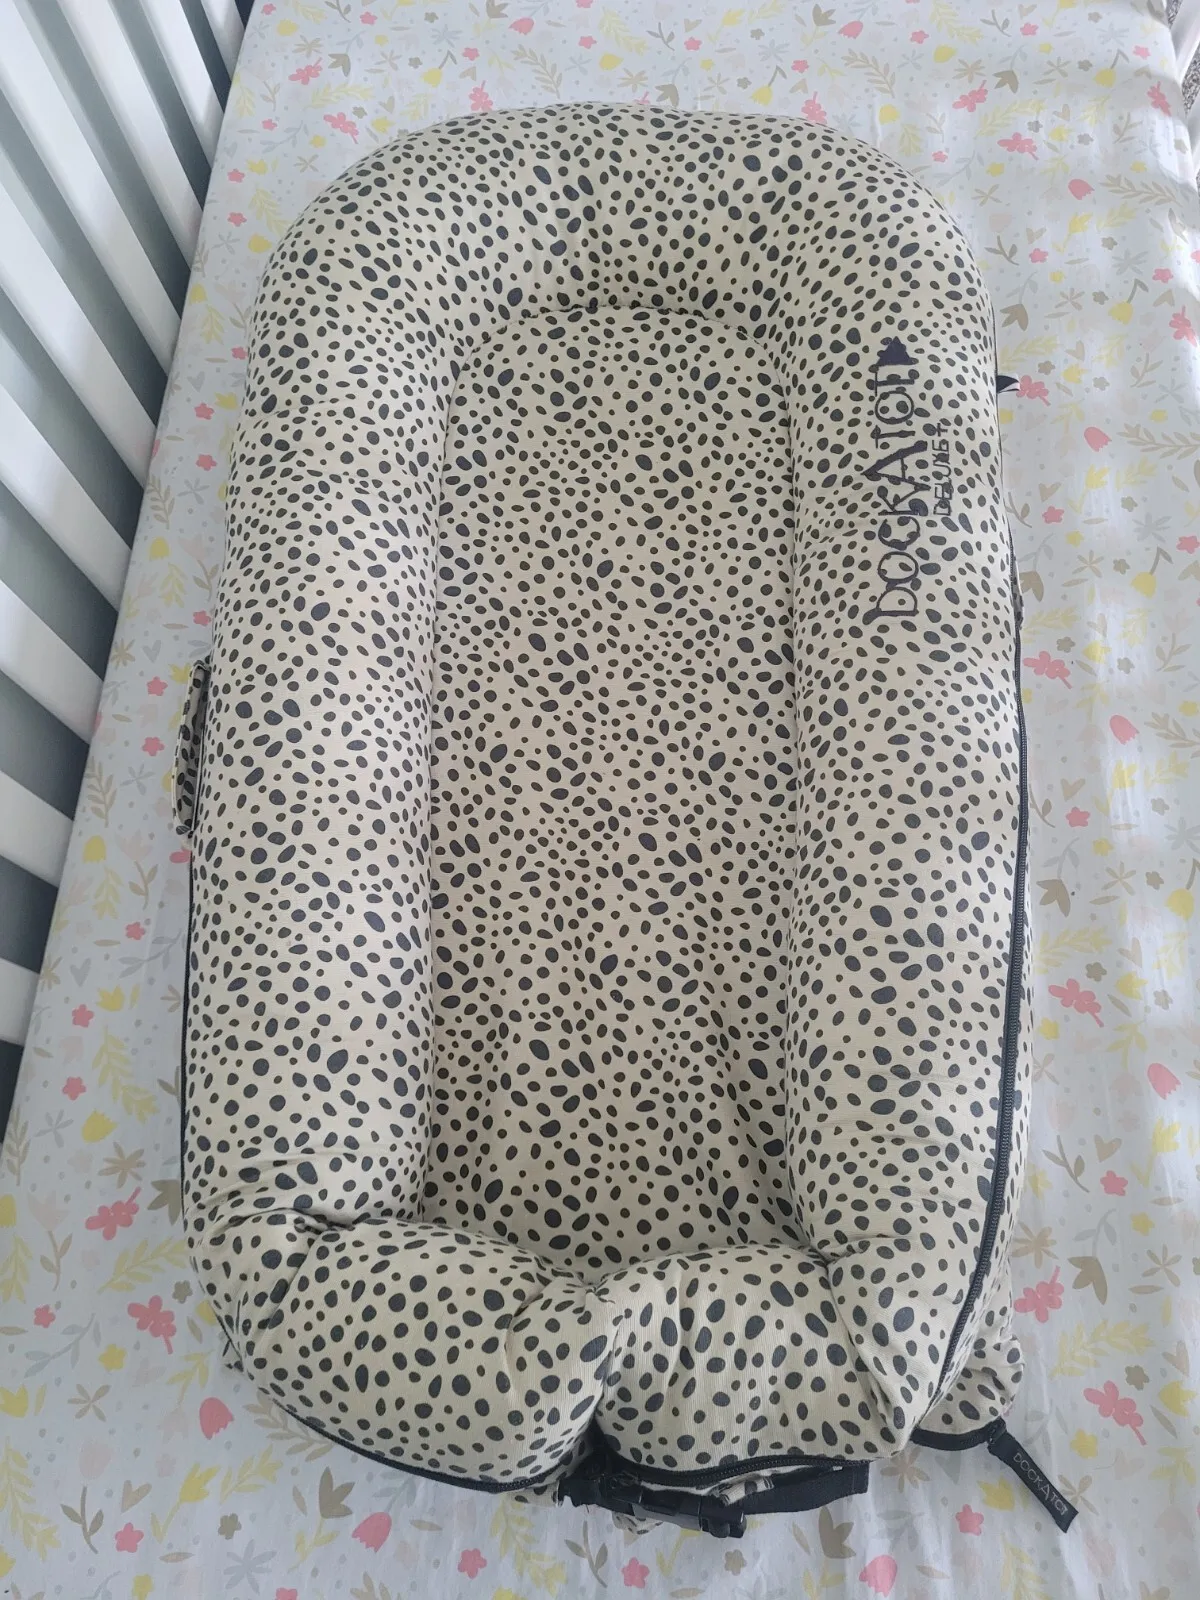 Dockatot Deluxe+ Plus Painted Spots 0-8 Months Baby Lounger